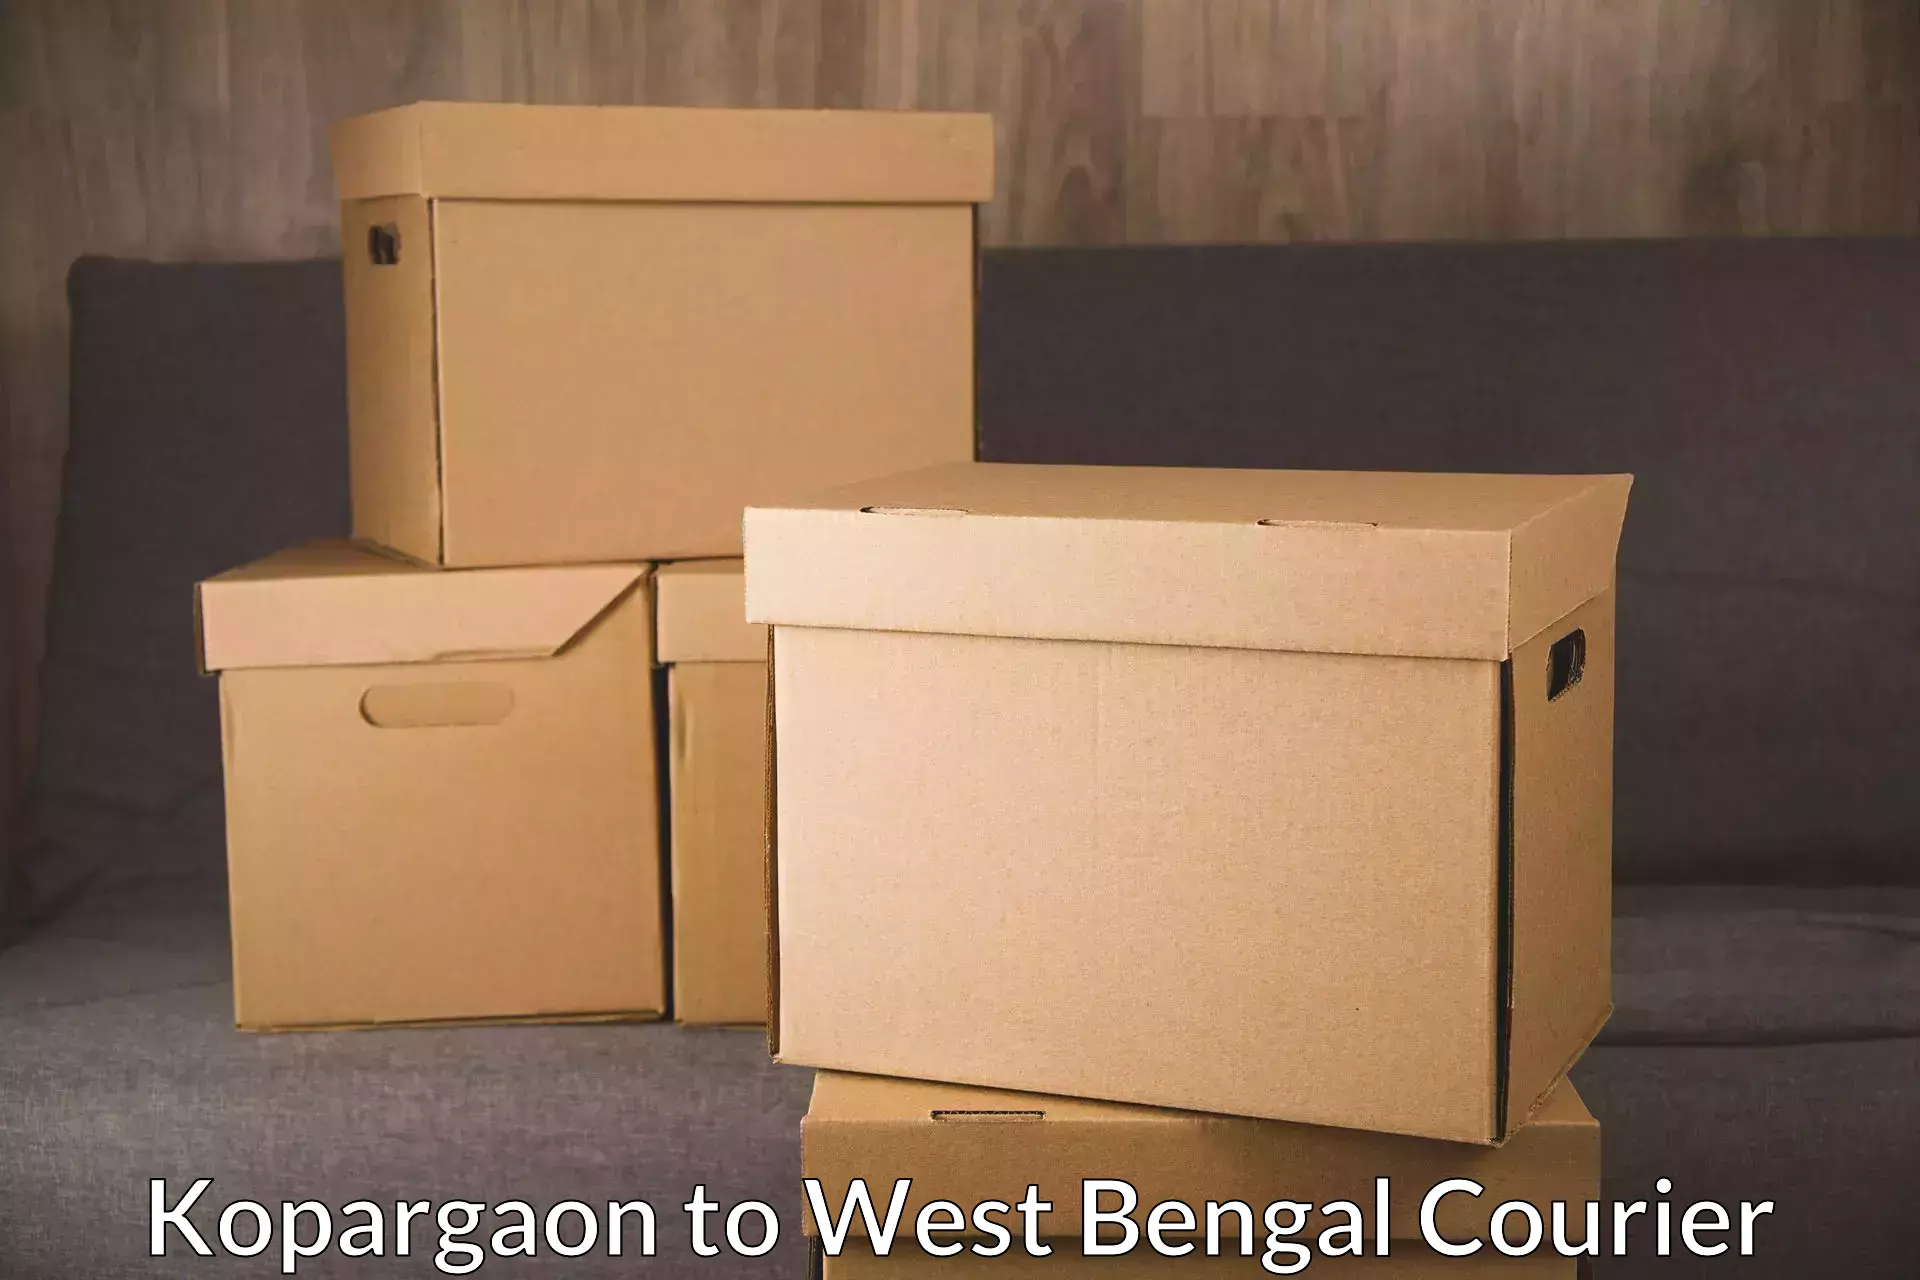 Nationwide delivery network Kopargaon to West Bengal